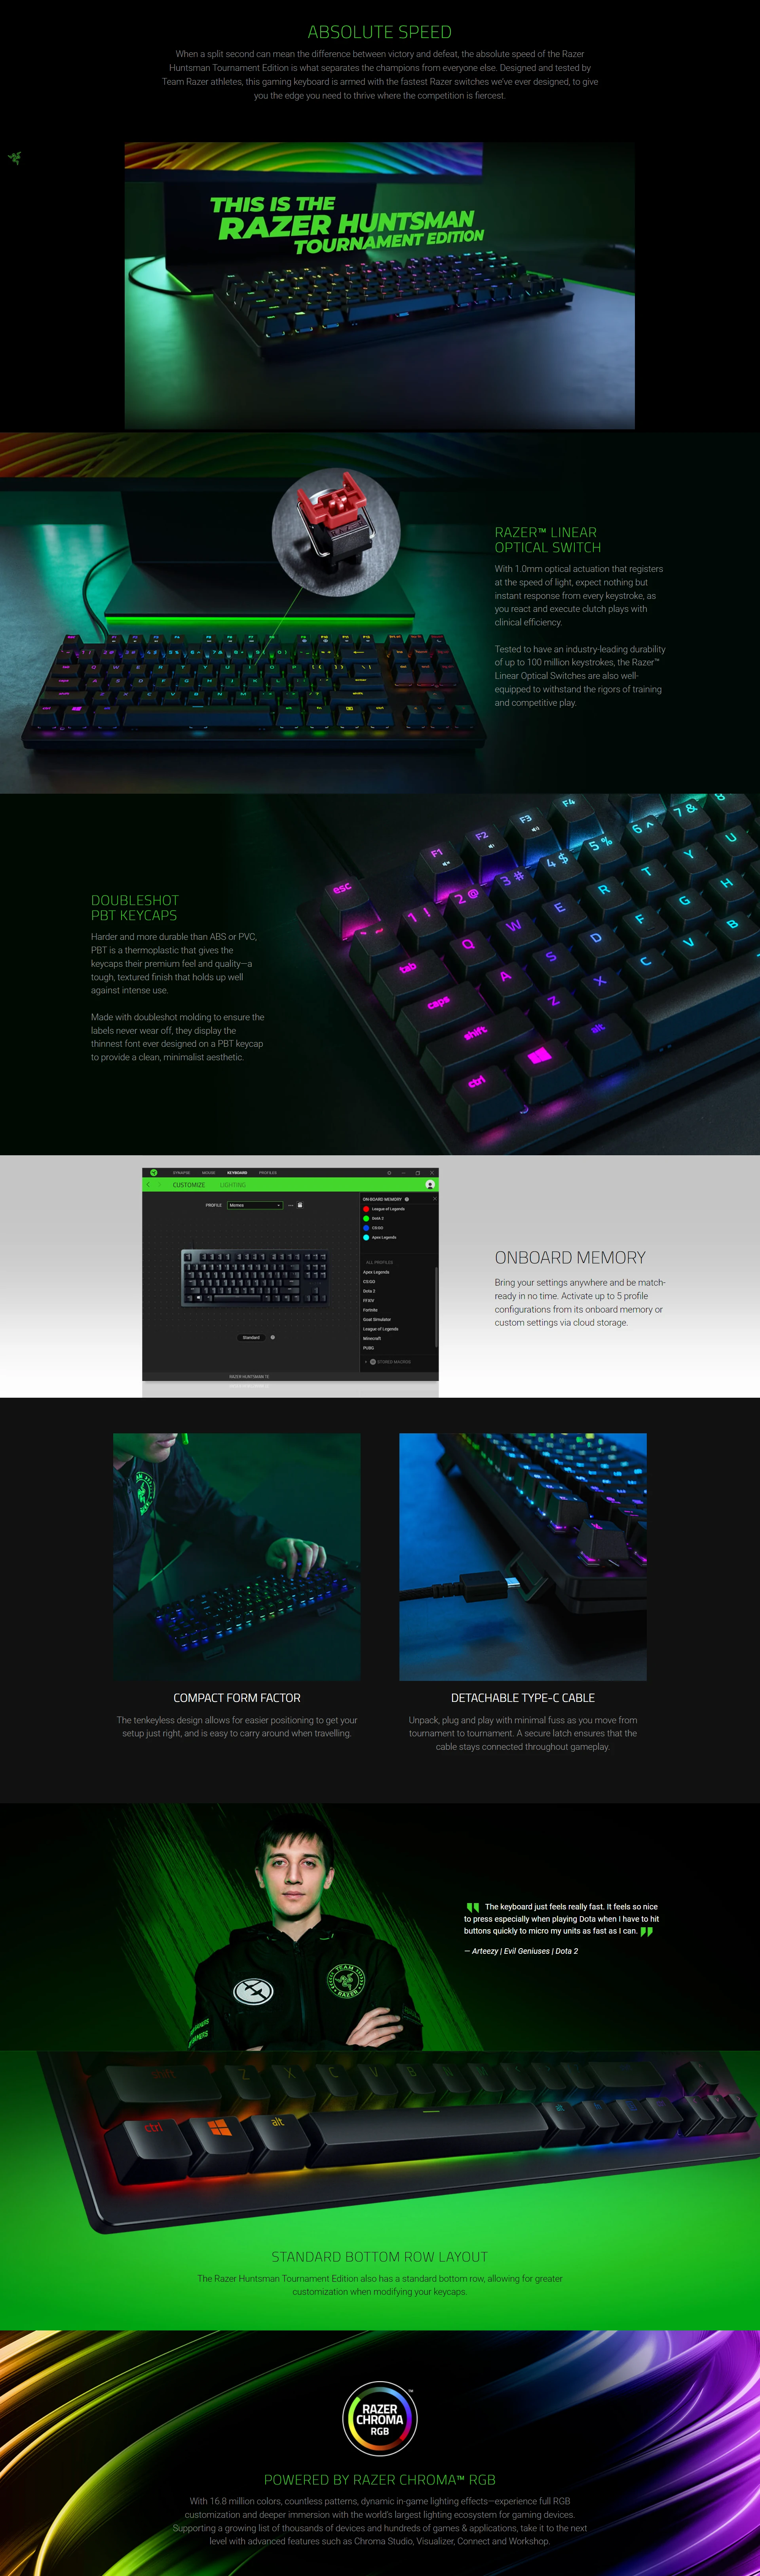 Overview - Razer Huntsman Tournament Edition Compact Gaming Keyboard with Razer Linear Optical Switches